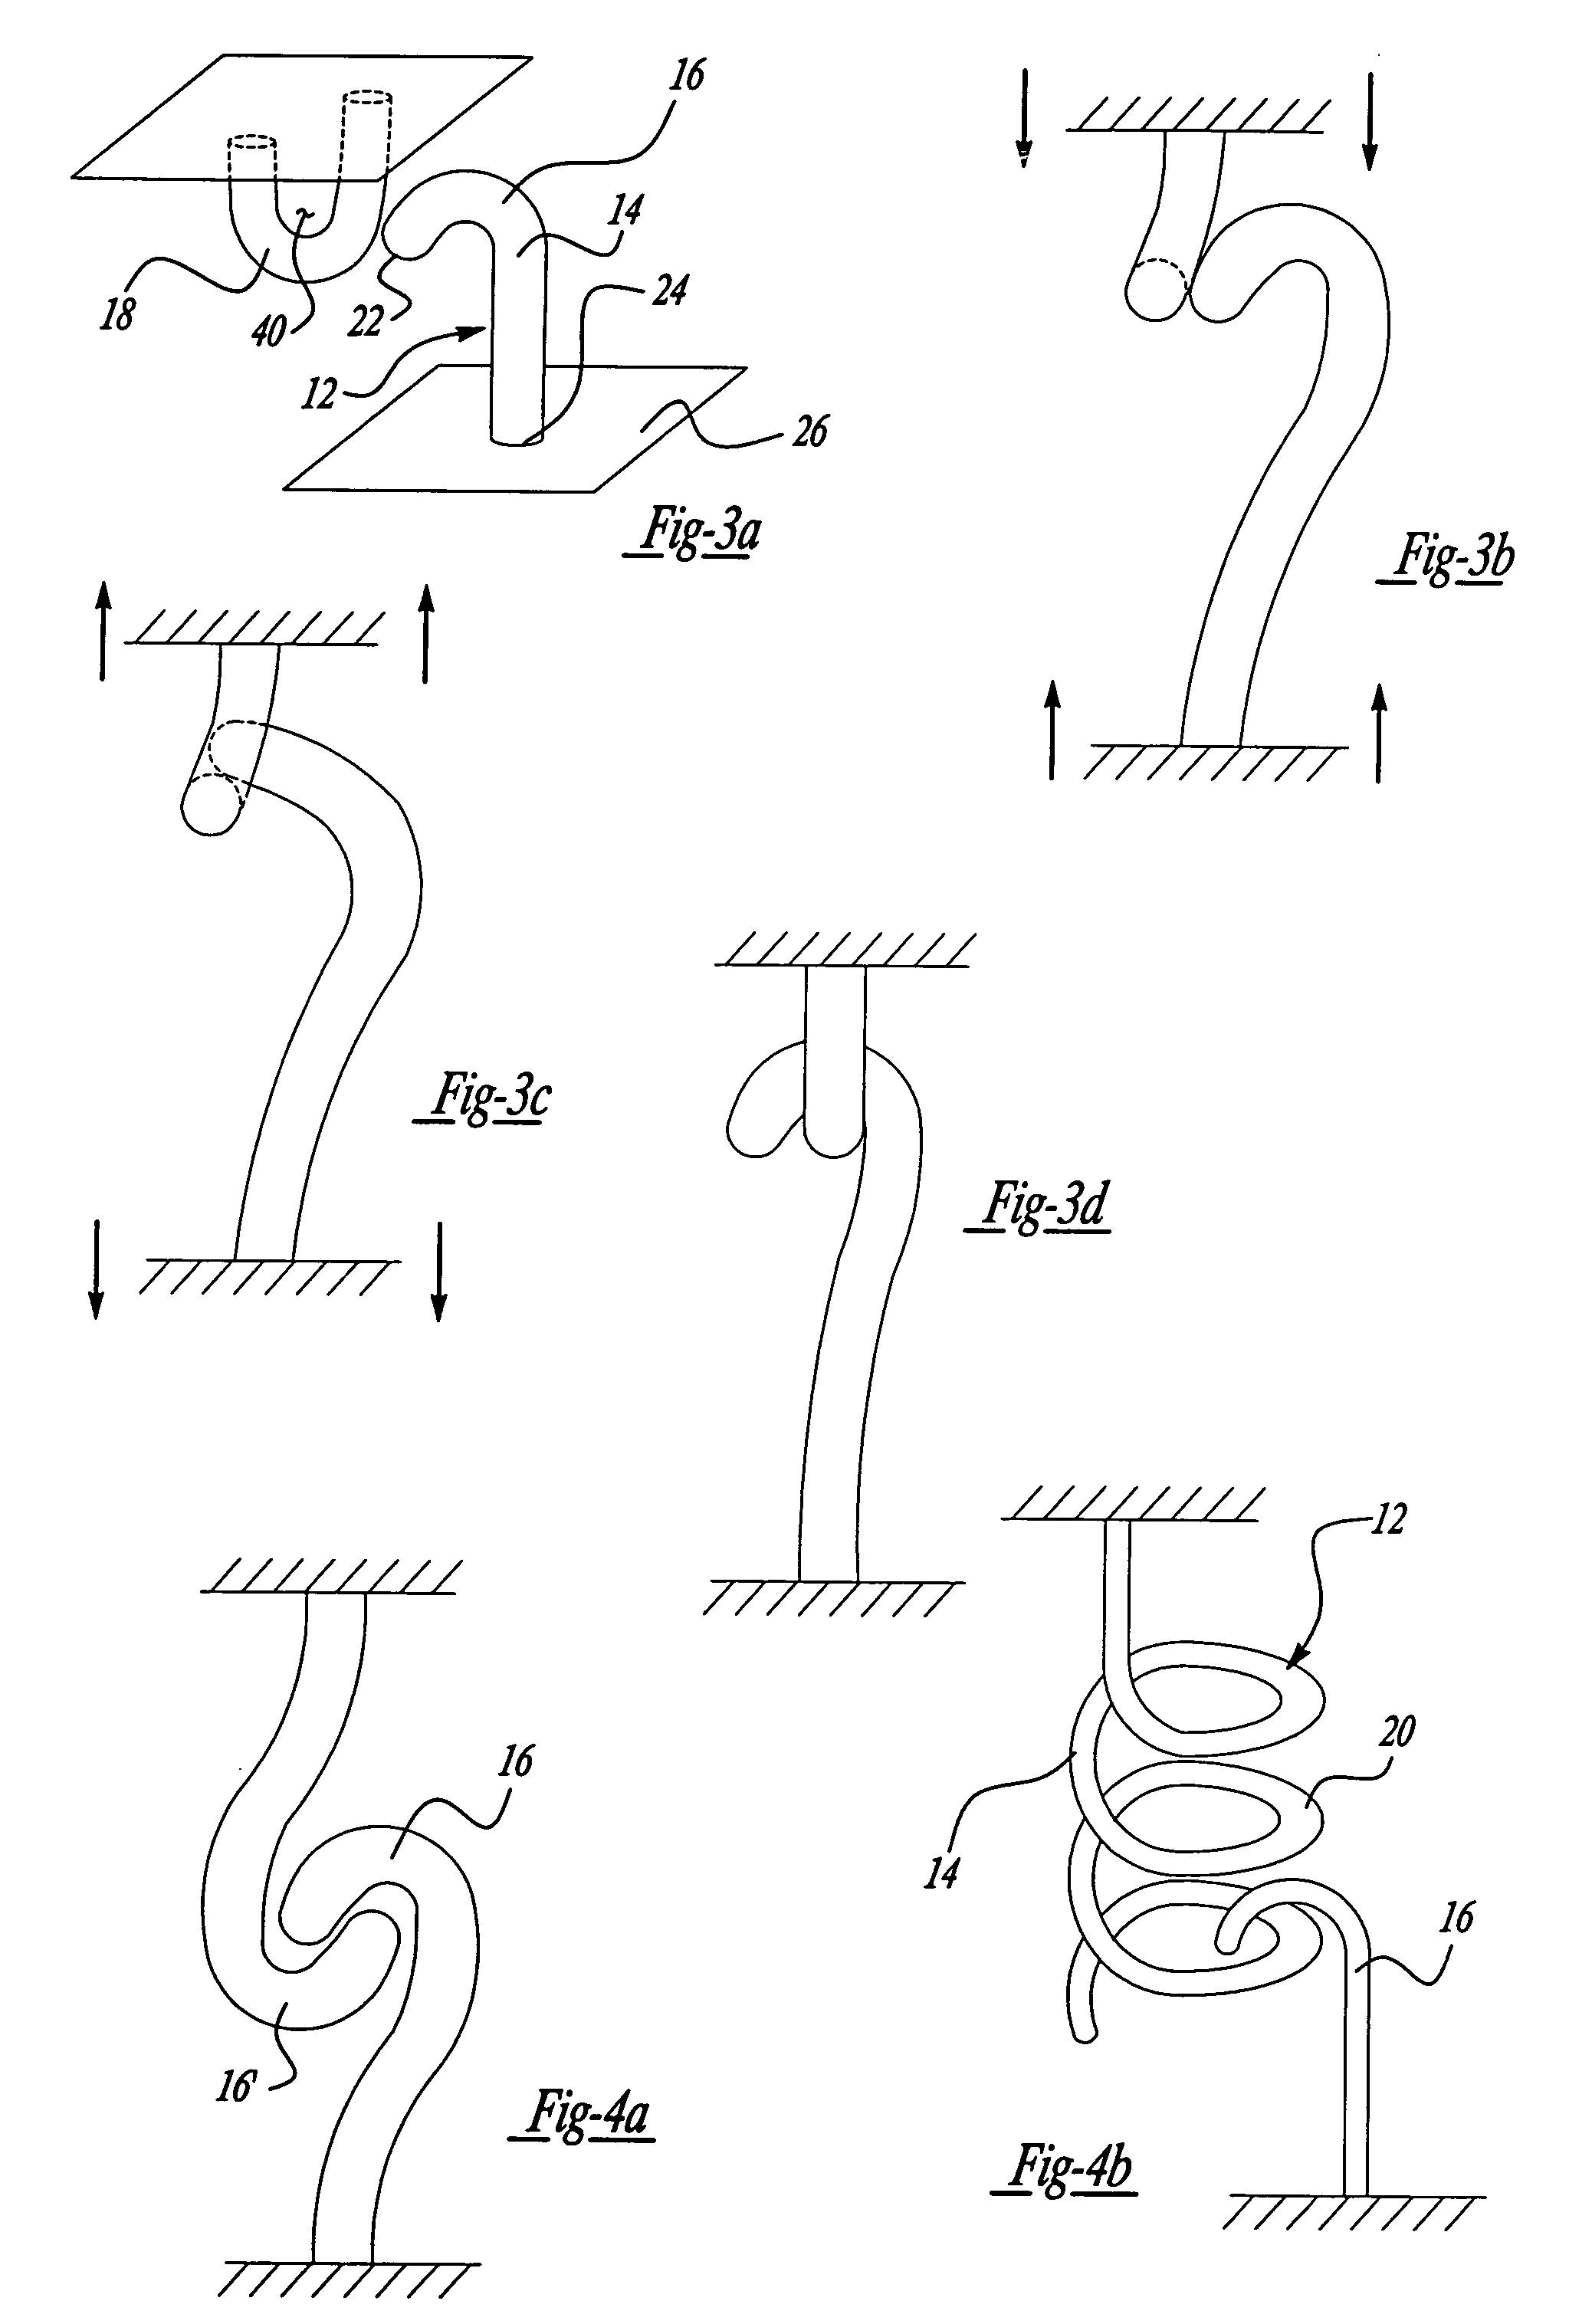 Micro-fastening system and method of manufacture